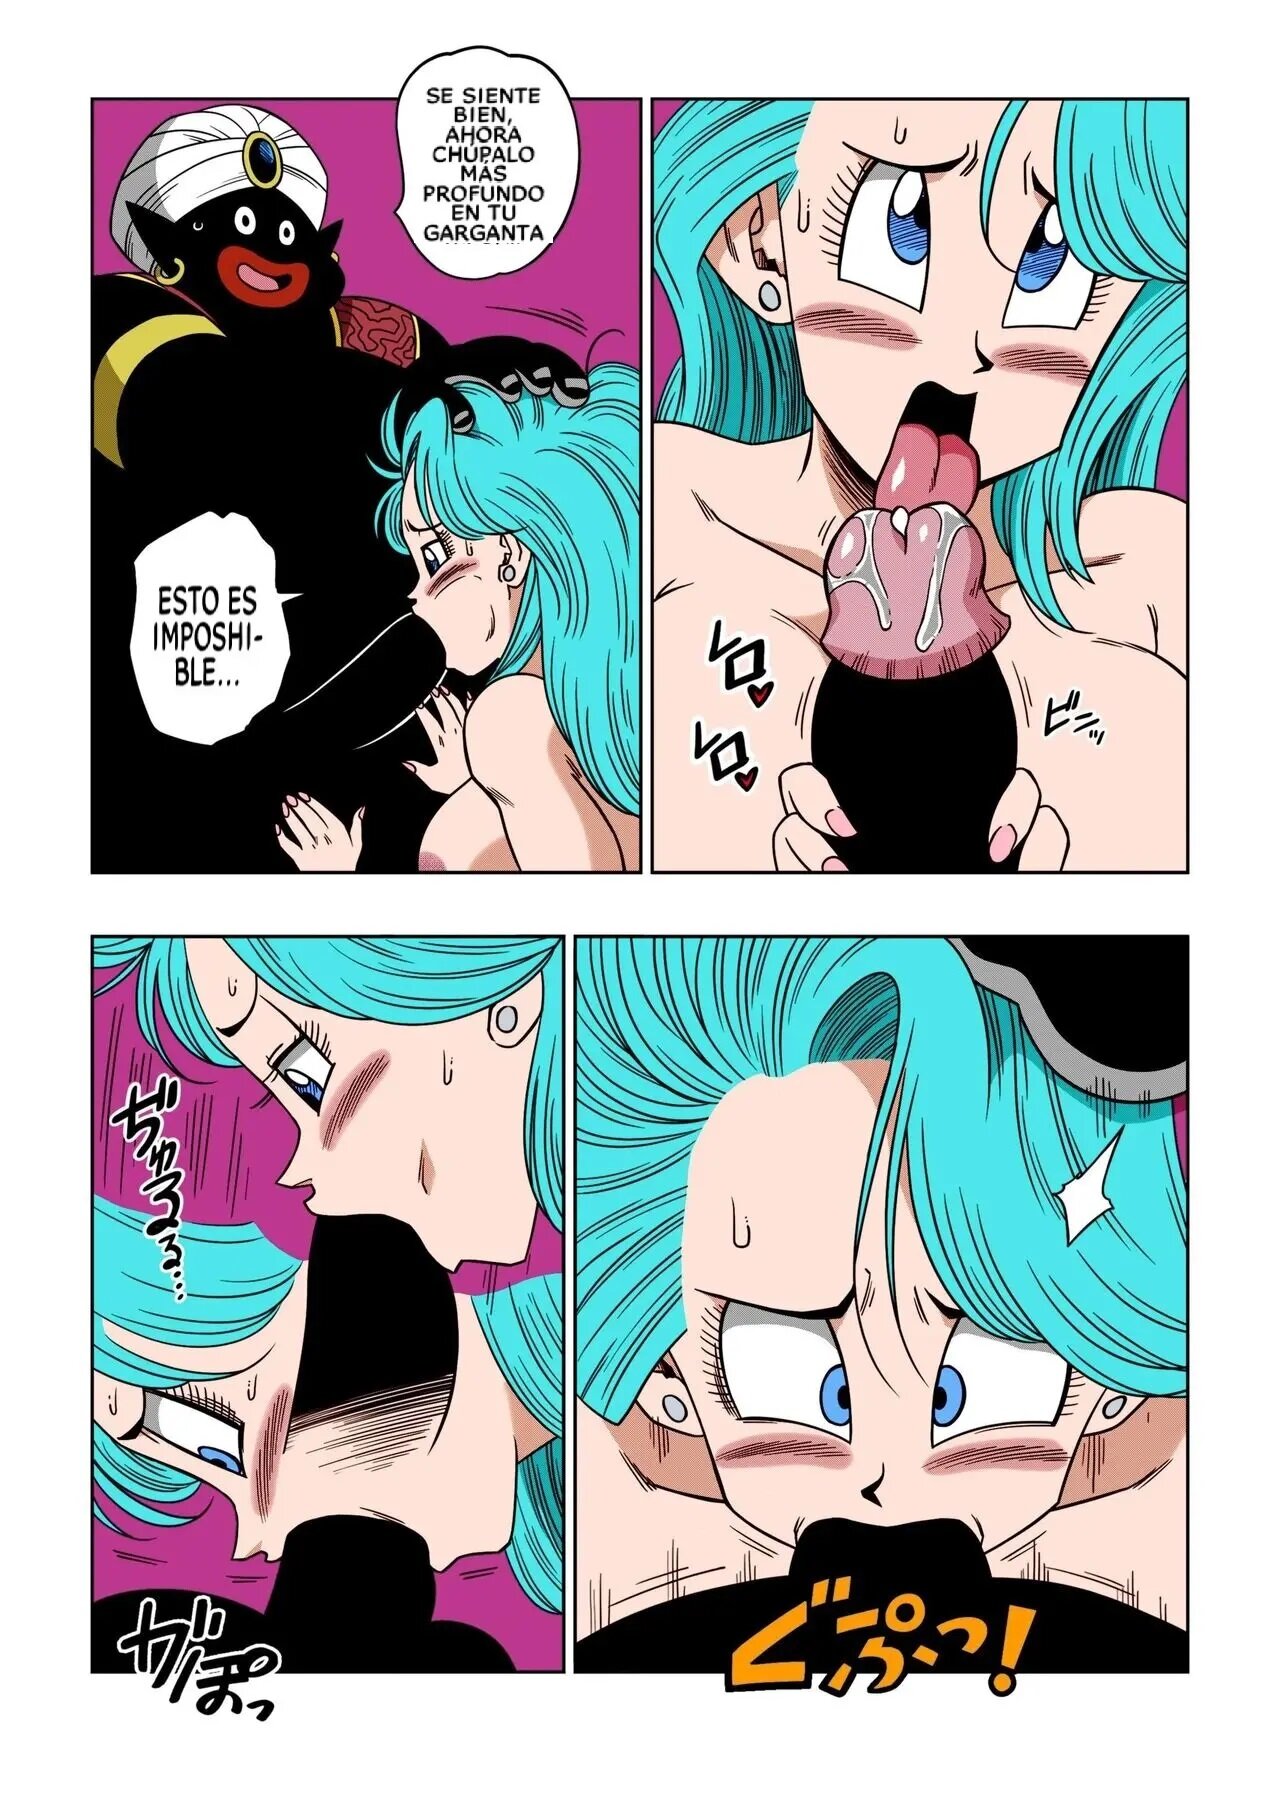 Dagon Ball - Bulma Meets Mr. Popo - Sex Inside the Mysterious Spaceship -  Page 9 - HentaiEra